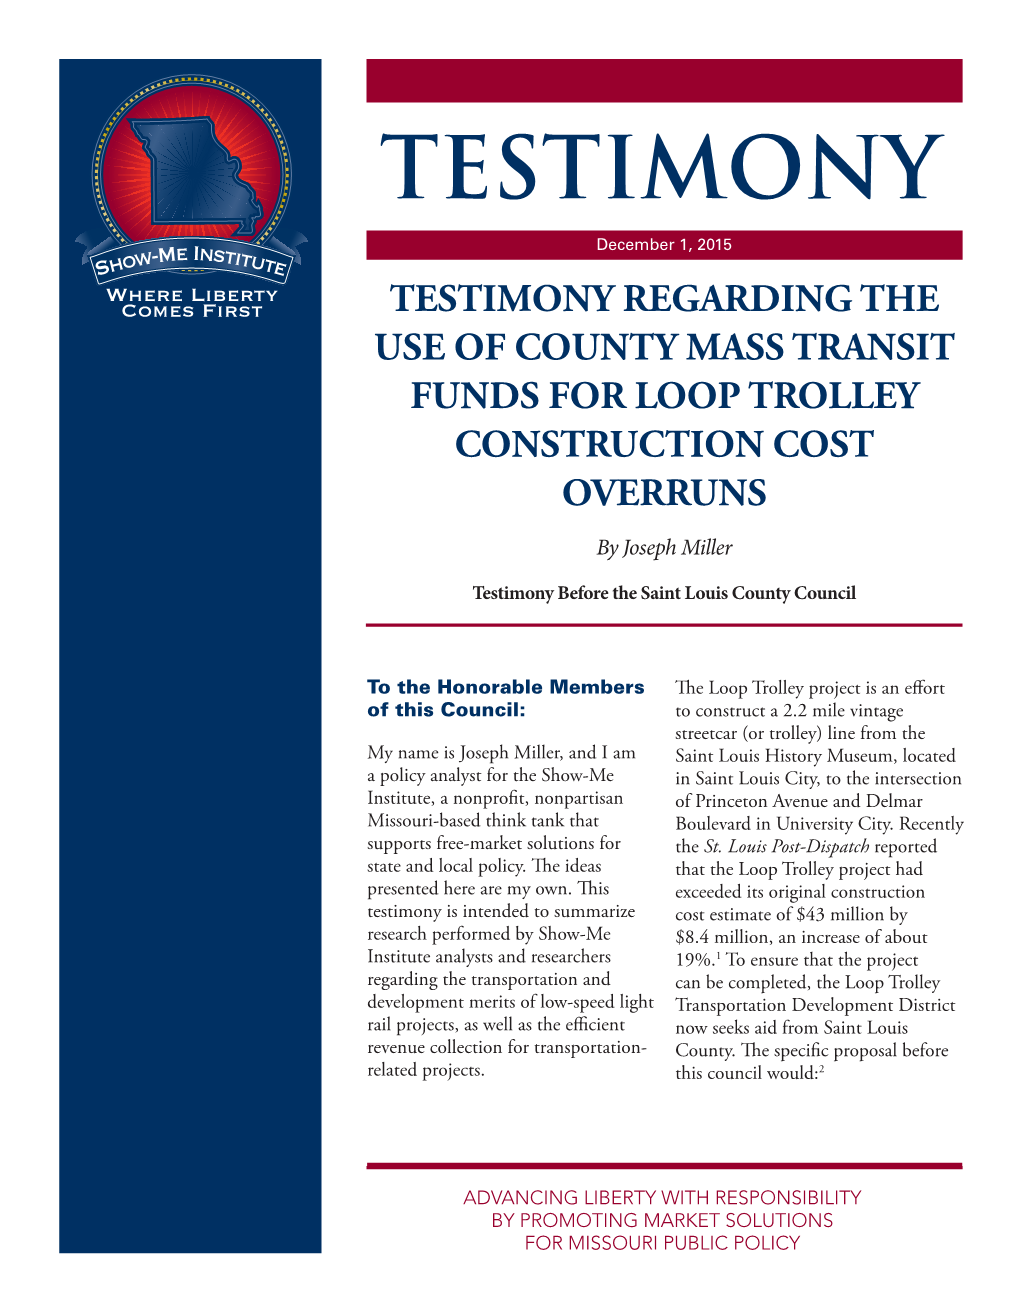 Testimony Regarding the Use of County Mass Transit Funds for Loop Trolley Construction Cost Overruns